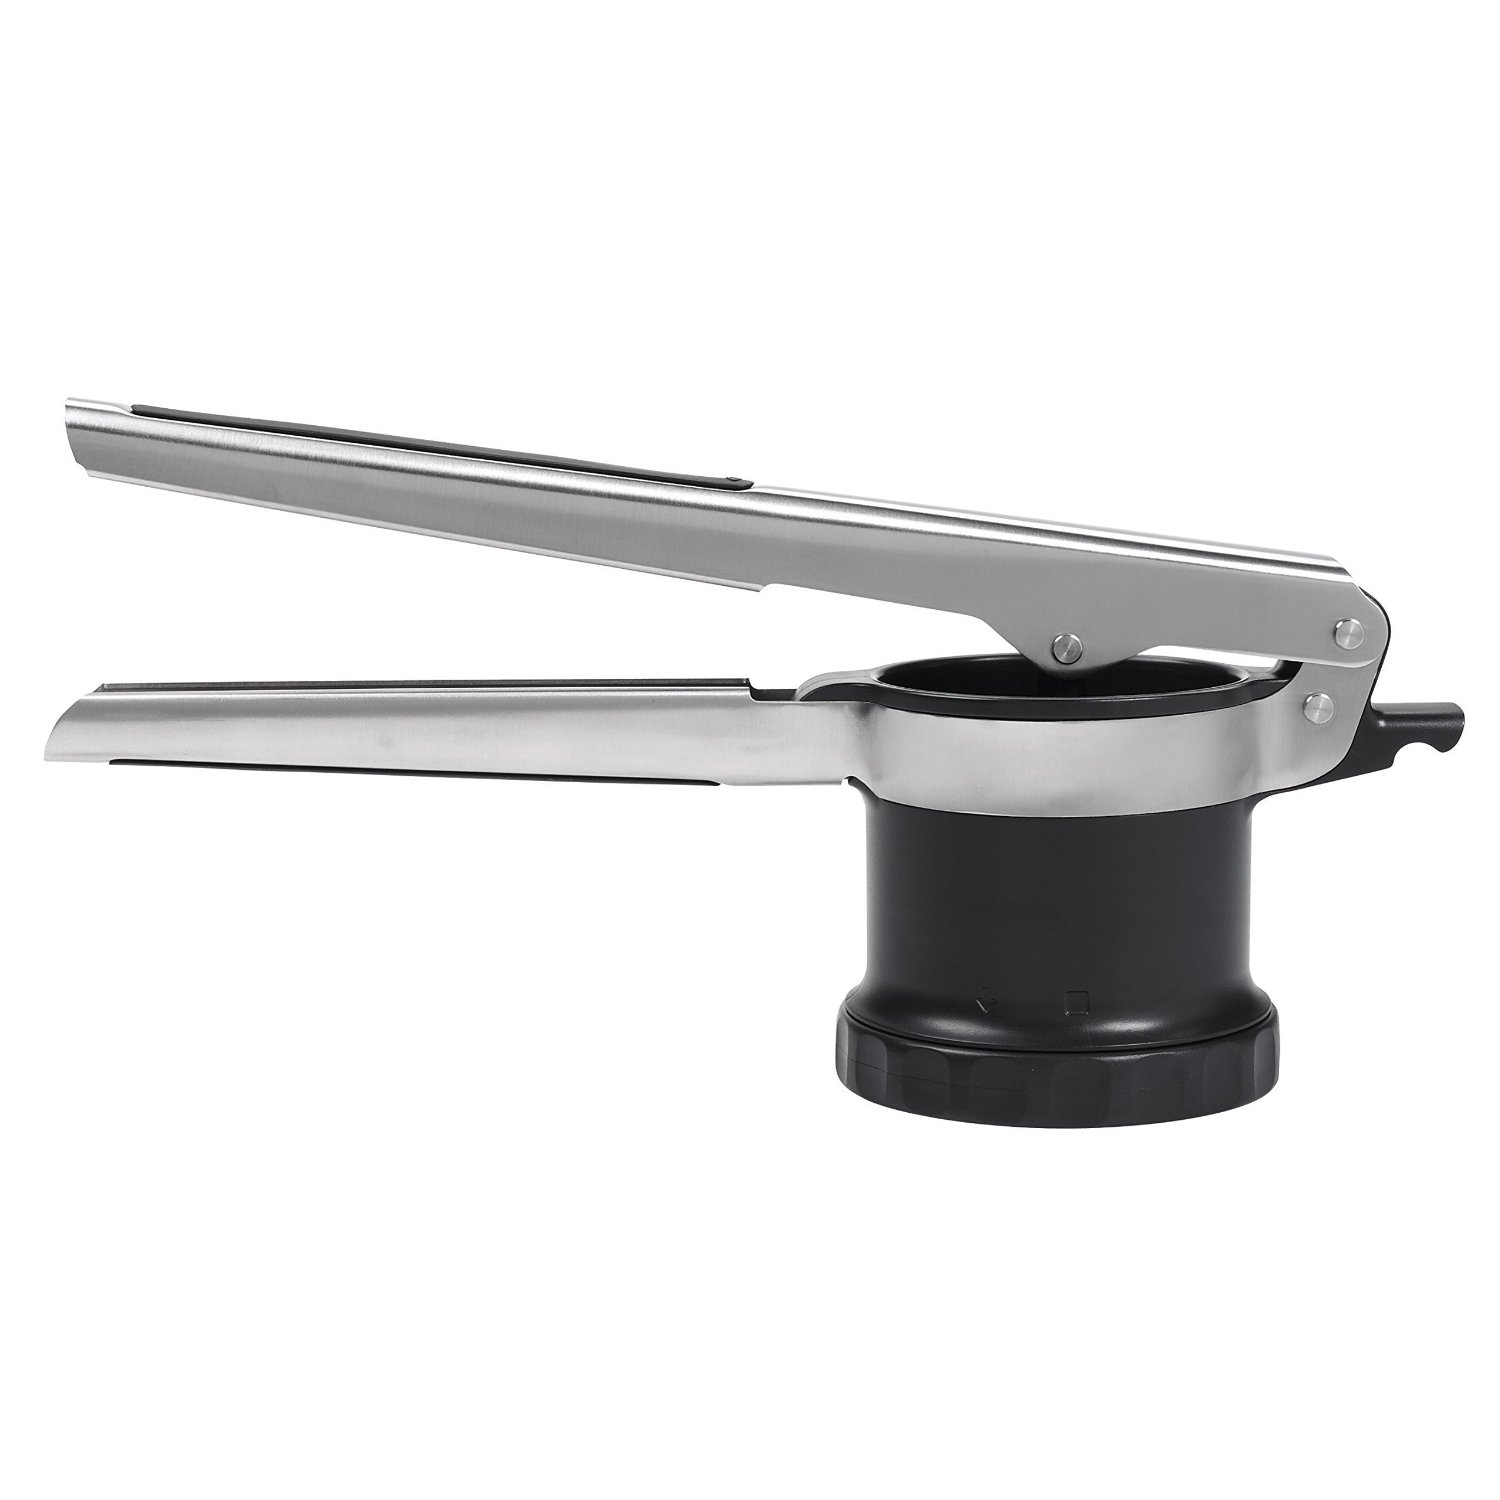 You are currently viewing OXO Good Grips 3-in-1 Adjustable Potato Ricer